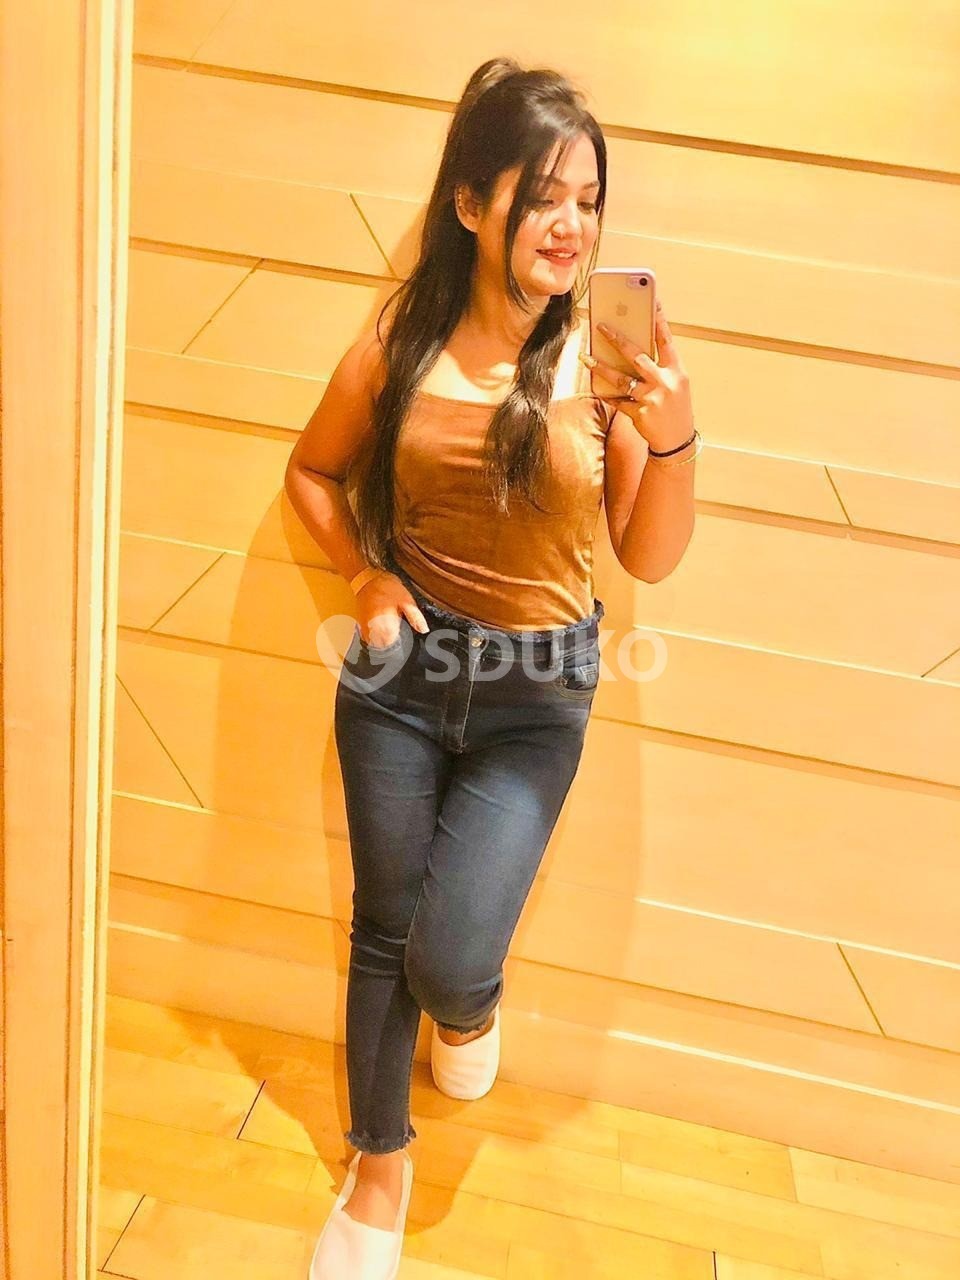 Dum Dum _ vip genuine call girl available college girls High profile doorstep incall outcall call me now